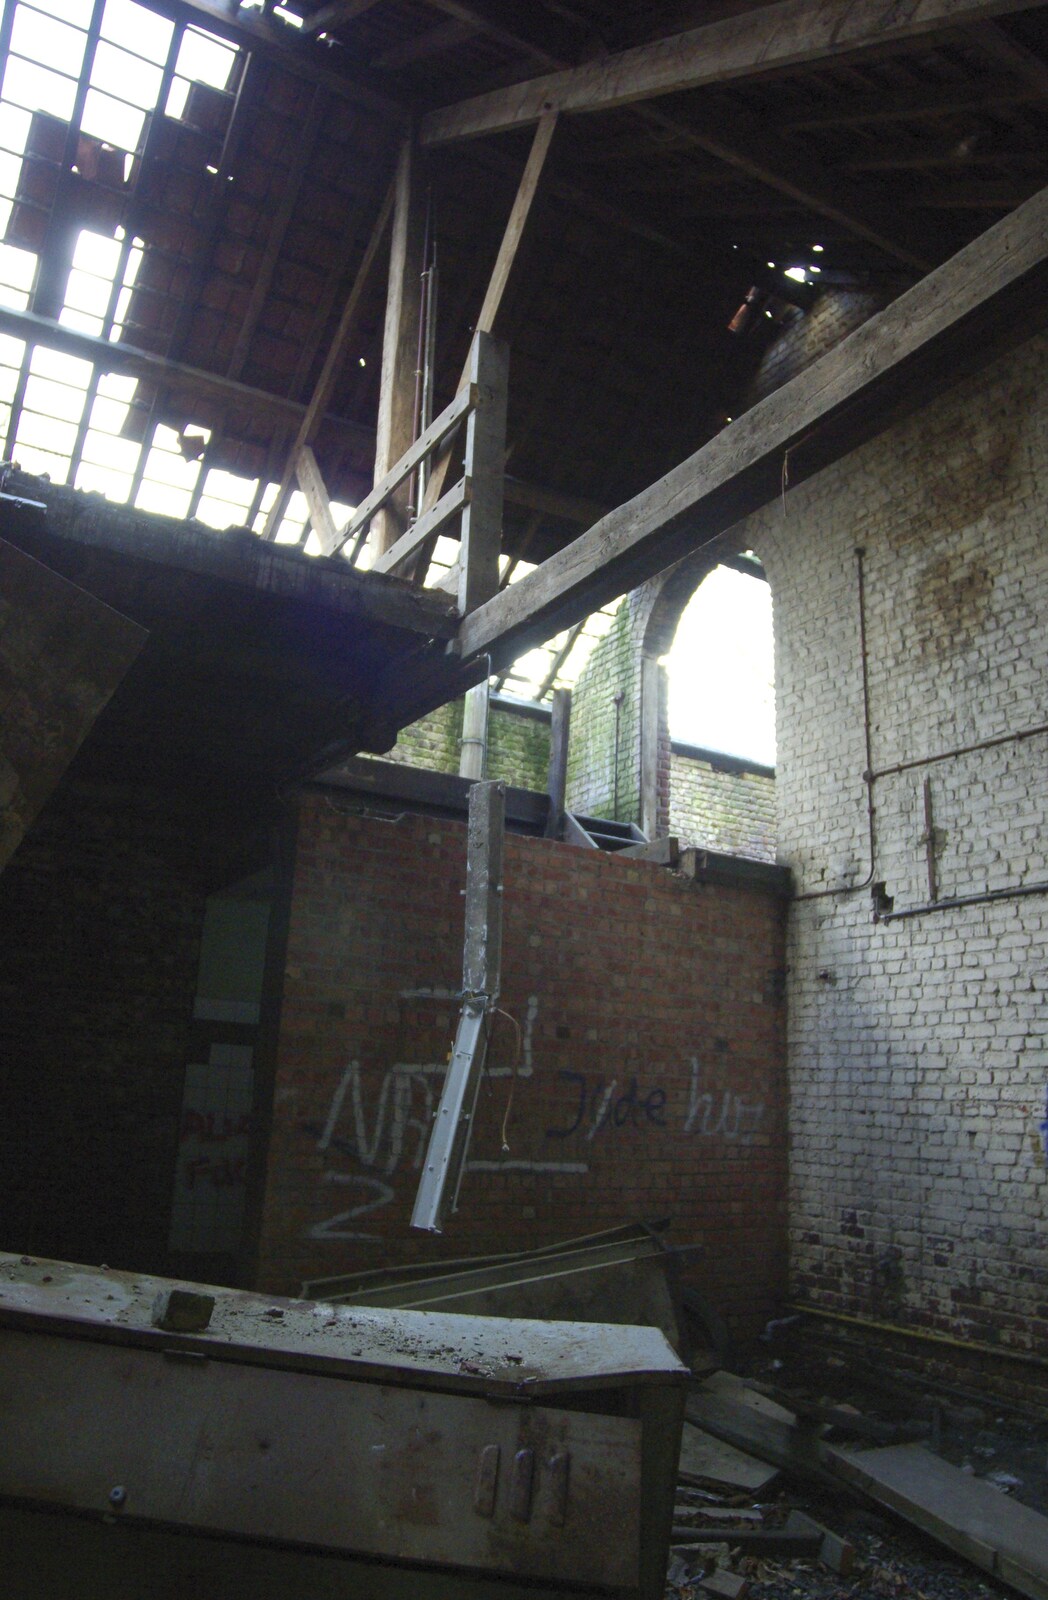 Inside the derelict building from The Christmas Markets of Brussels, Belgium - 1st January 2007